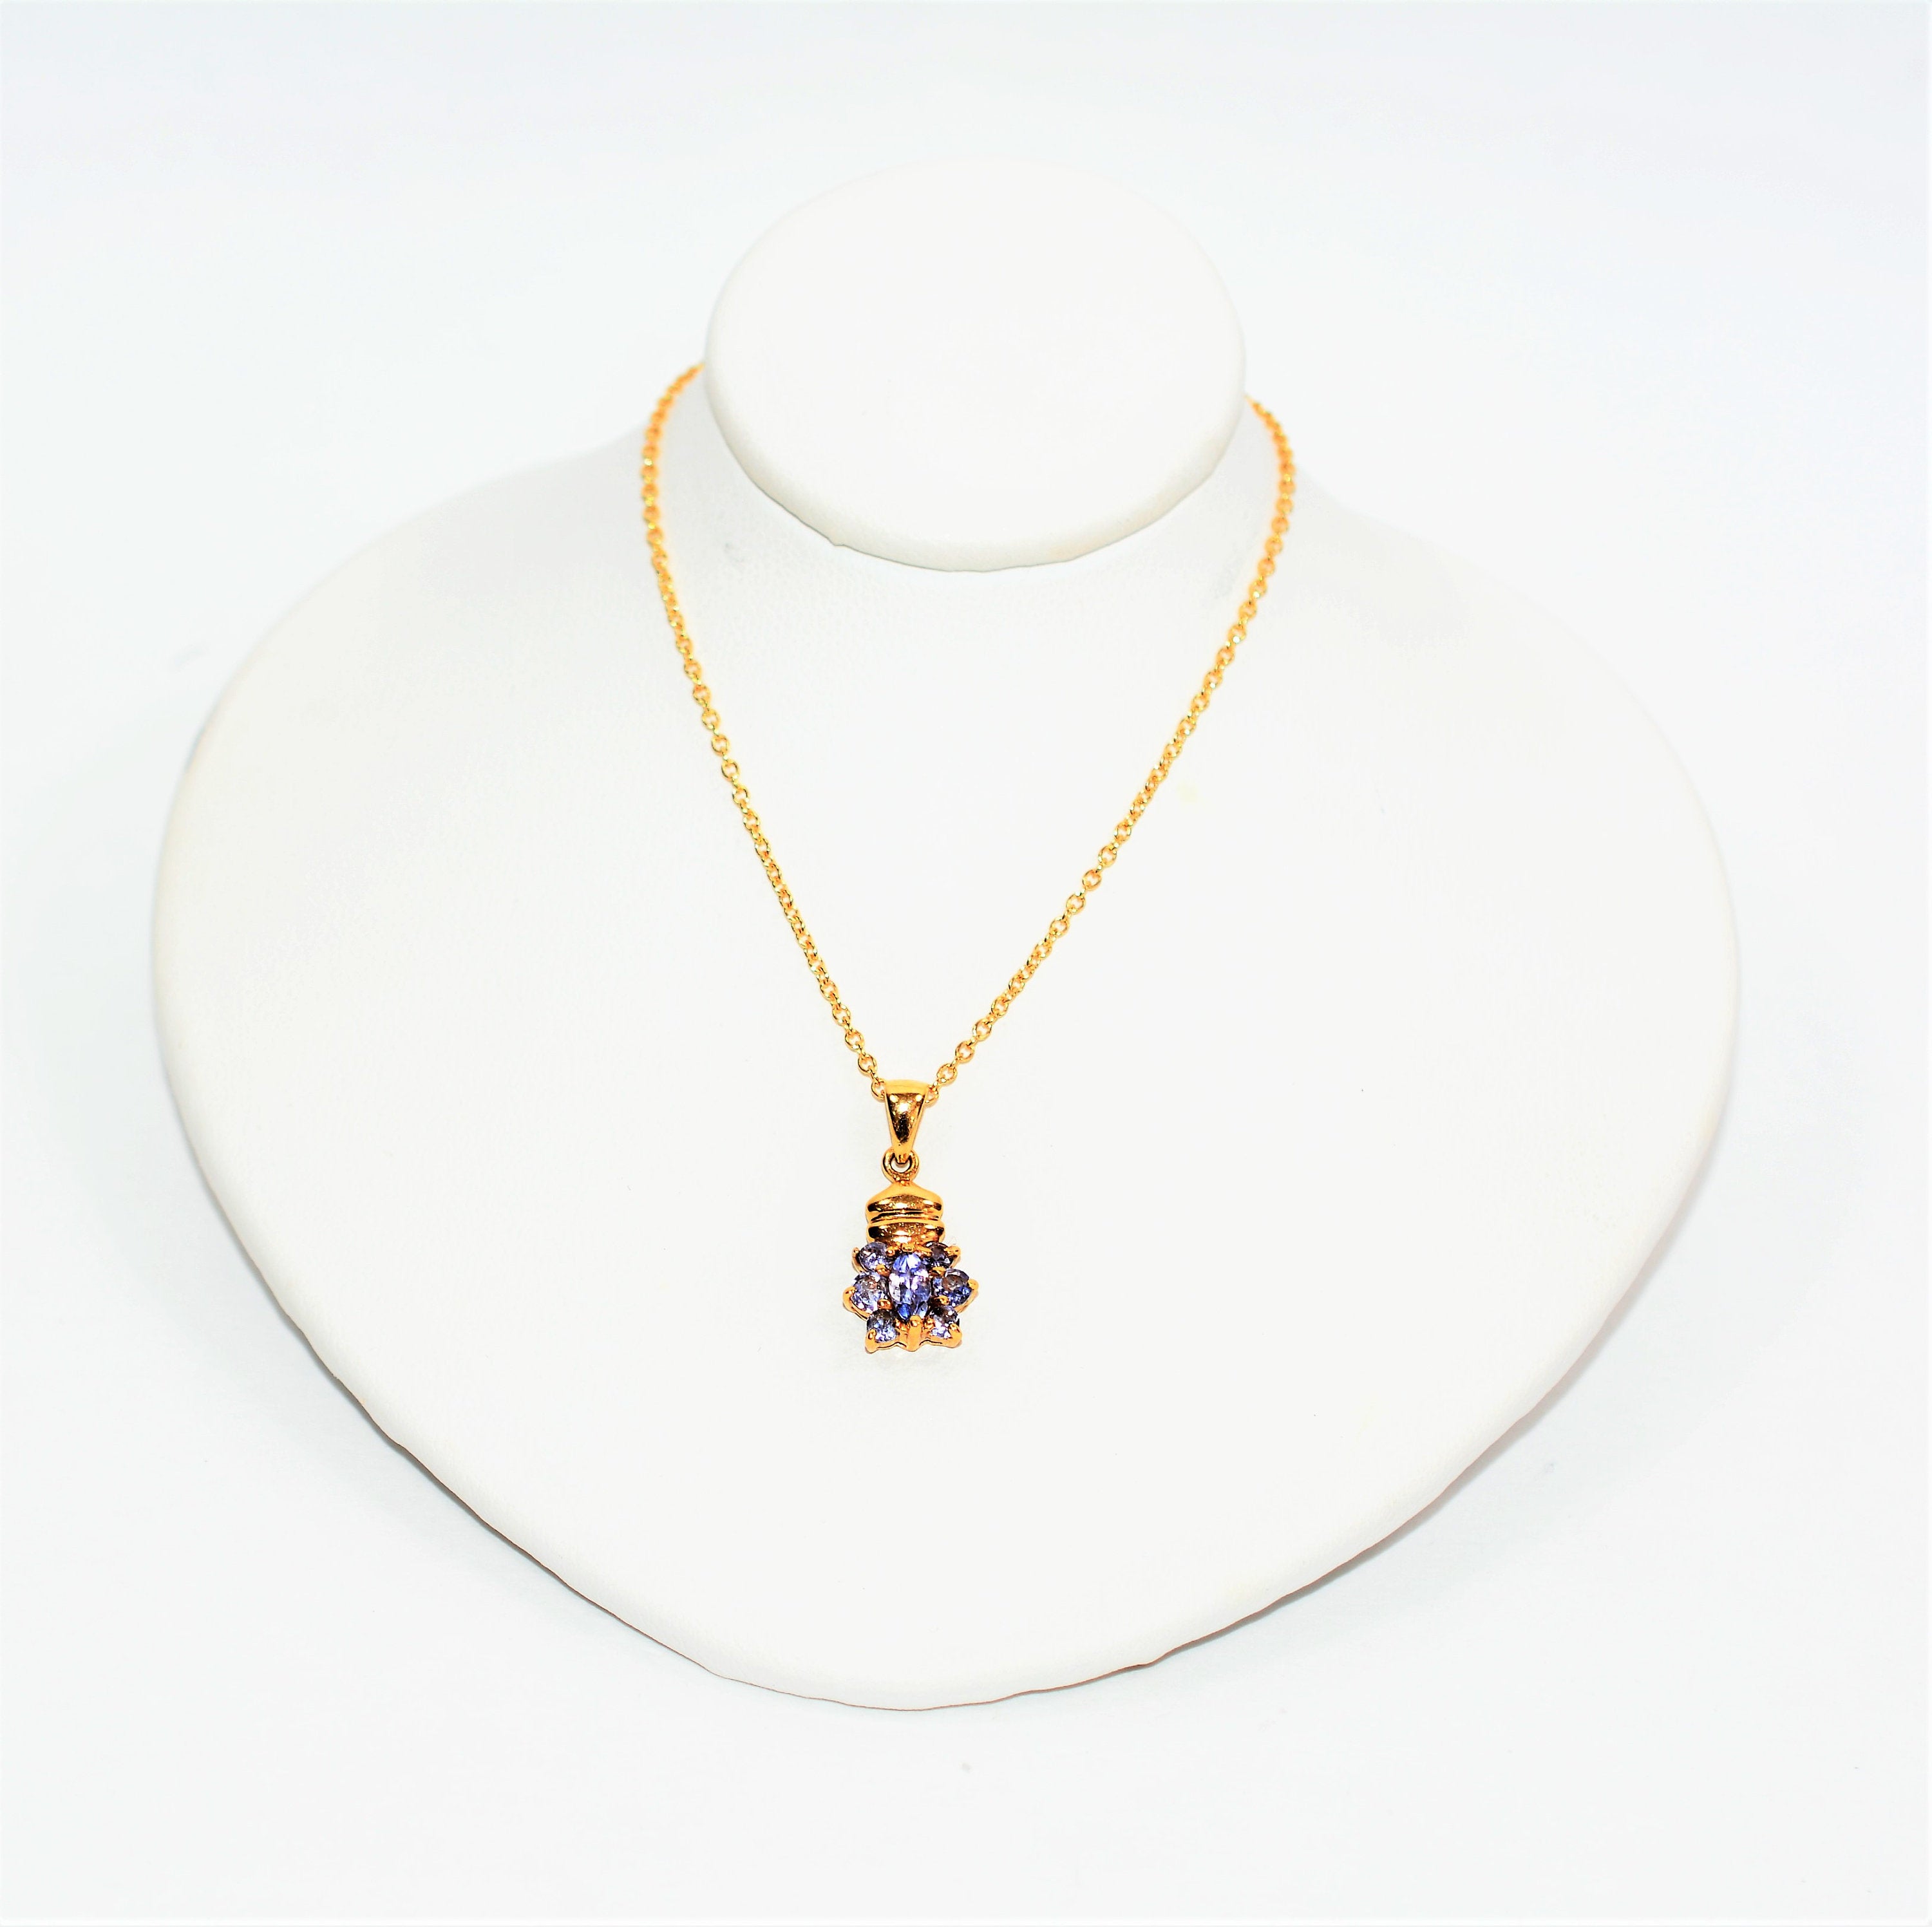 Natural Tanzanite Necklace 14K Solid Gold .66tcw Pendant Necklace Gemstone Cluster Necklace Statement Necklace Birthstone Necklace Estate